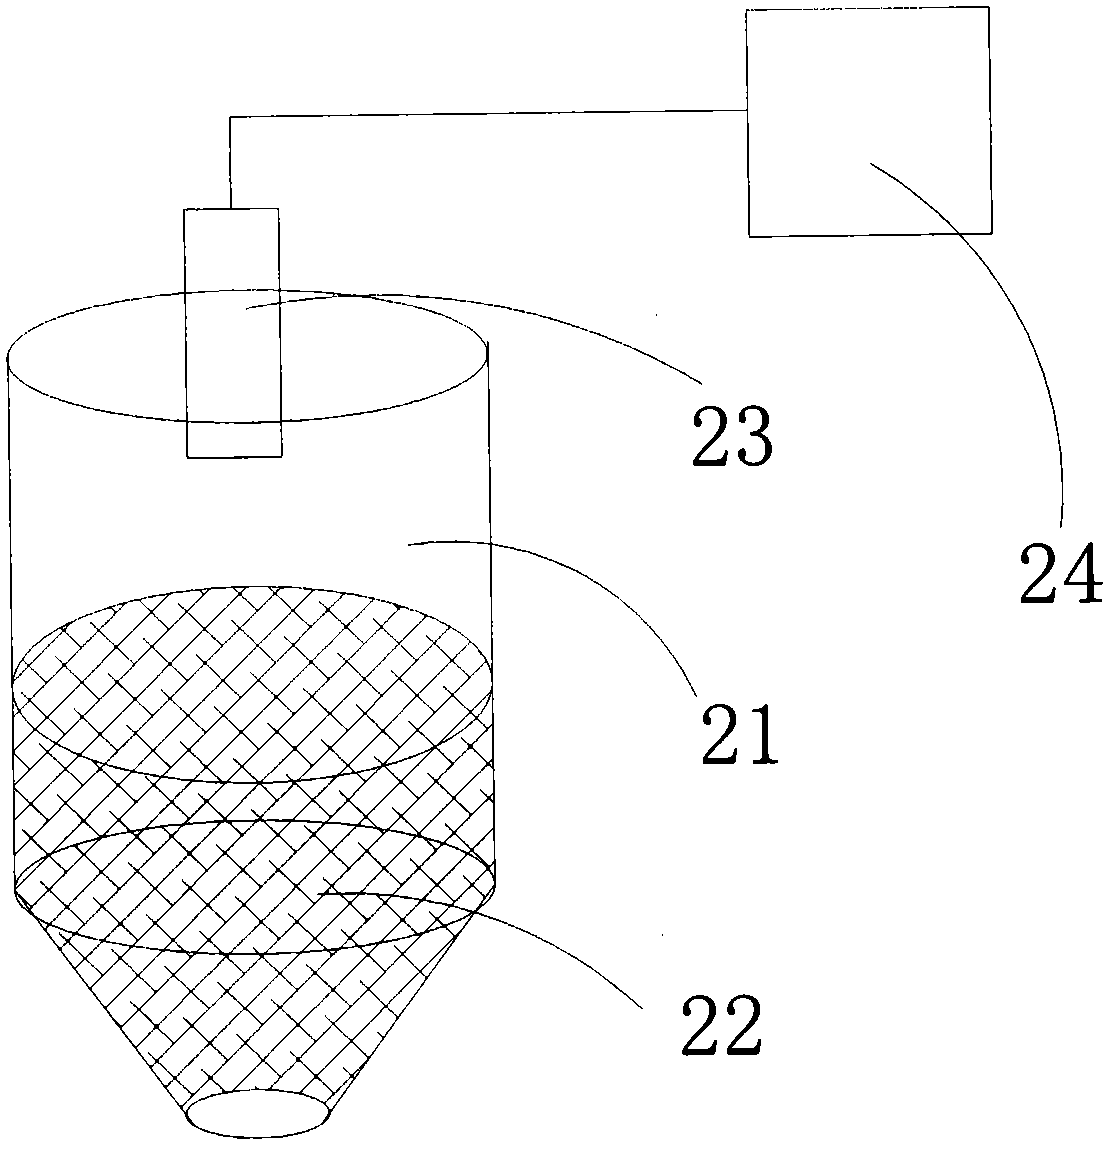 An intelligent intensive livestock and poultry monitoring system and method